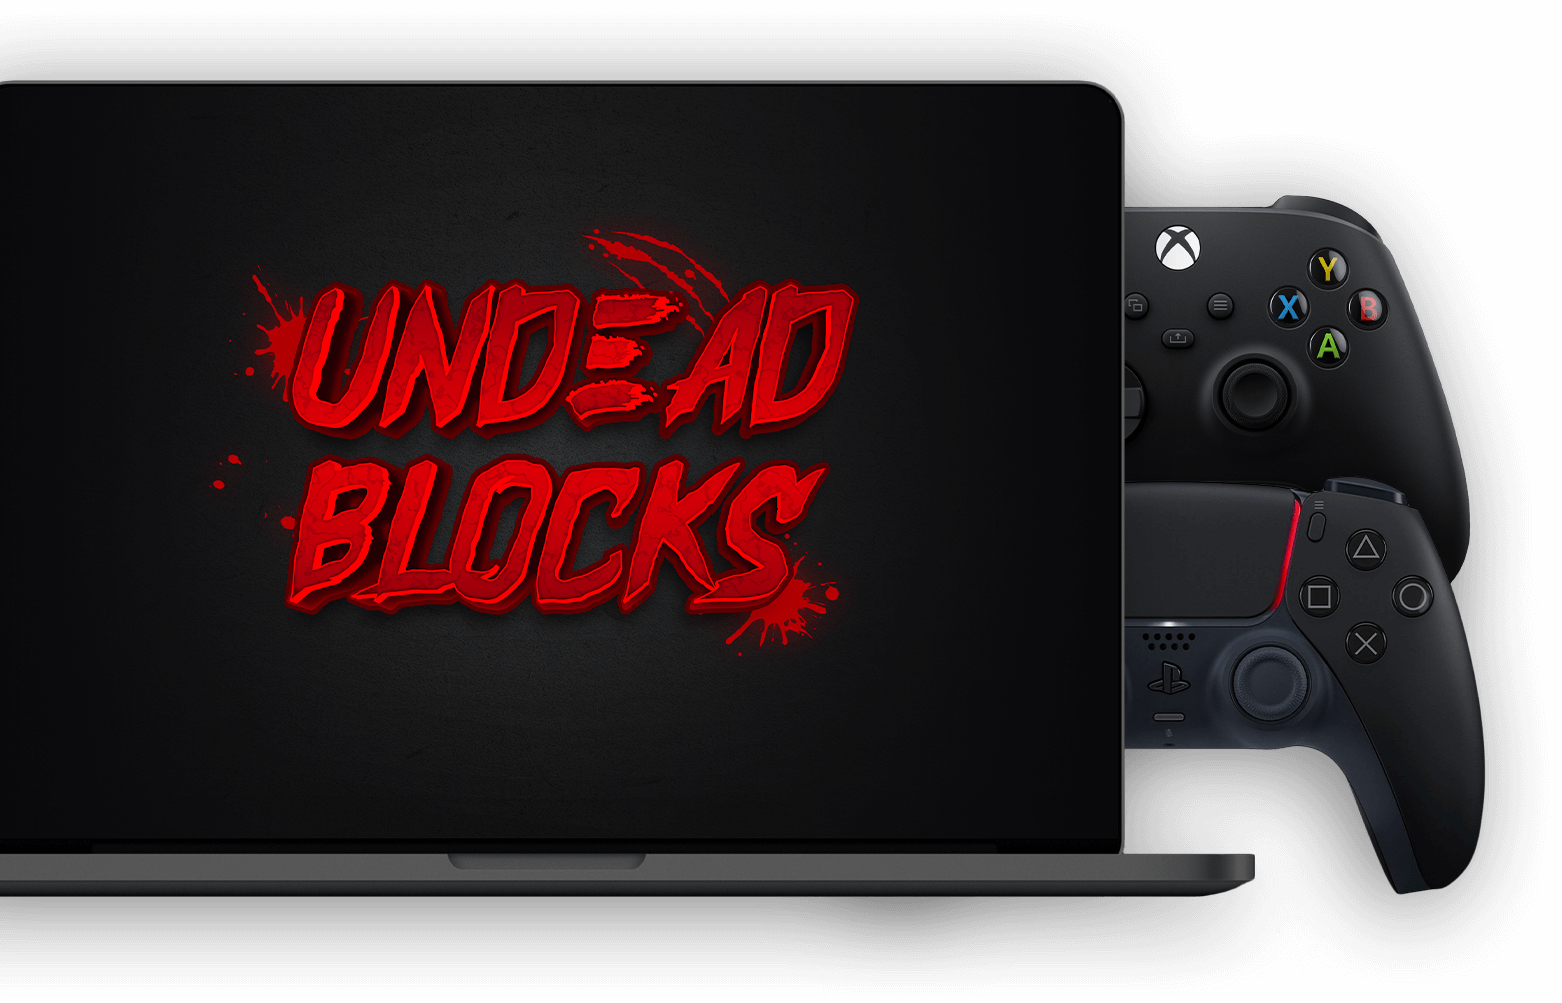 Undead Blocks announces Loot Coffin Collaboration with GameStop NFT, by  Undead Blocks